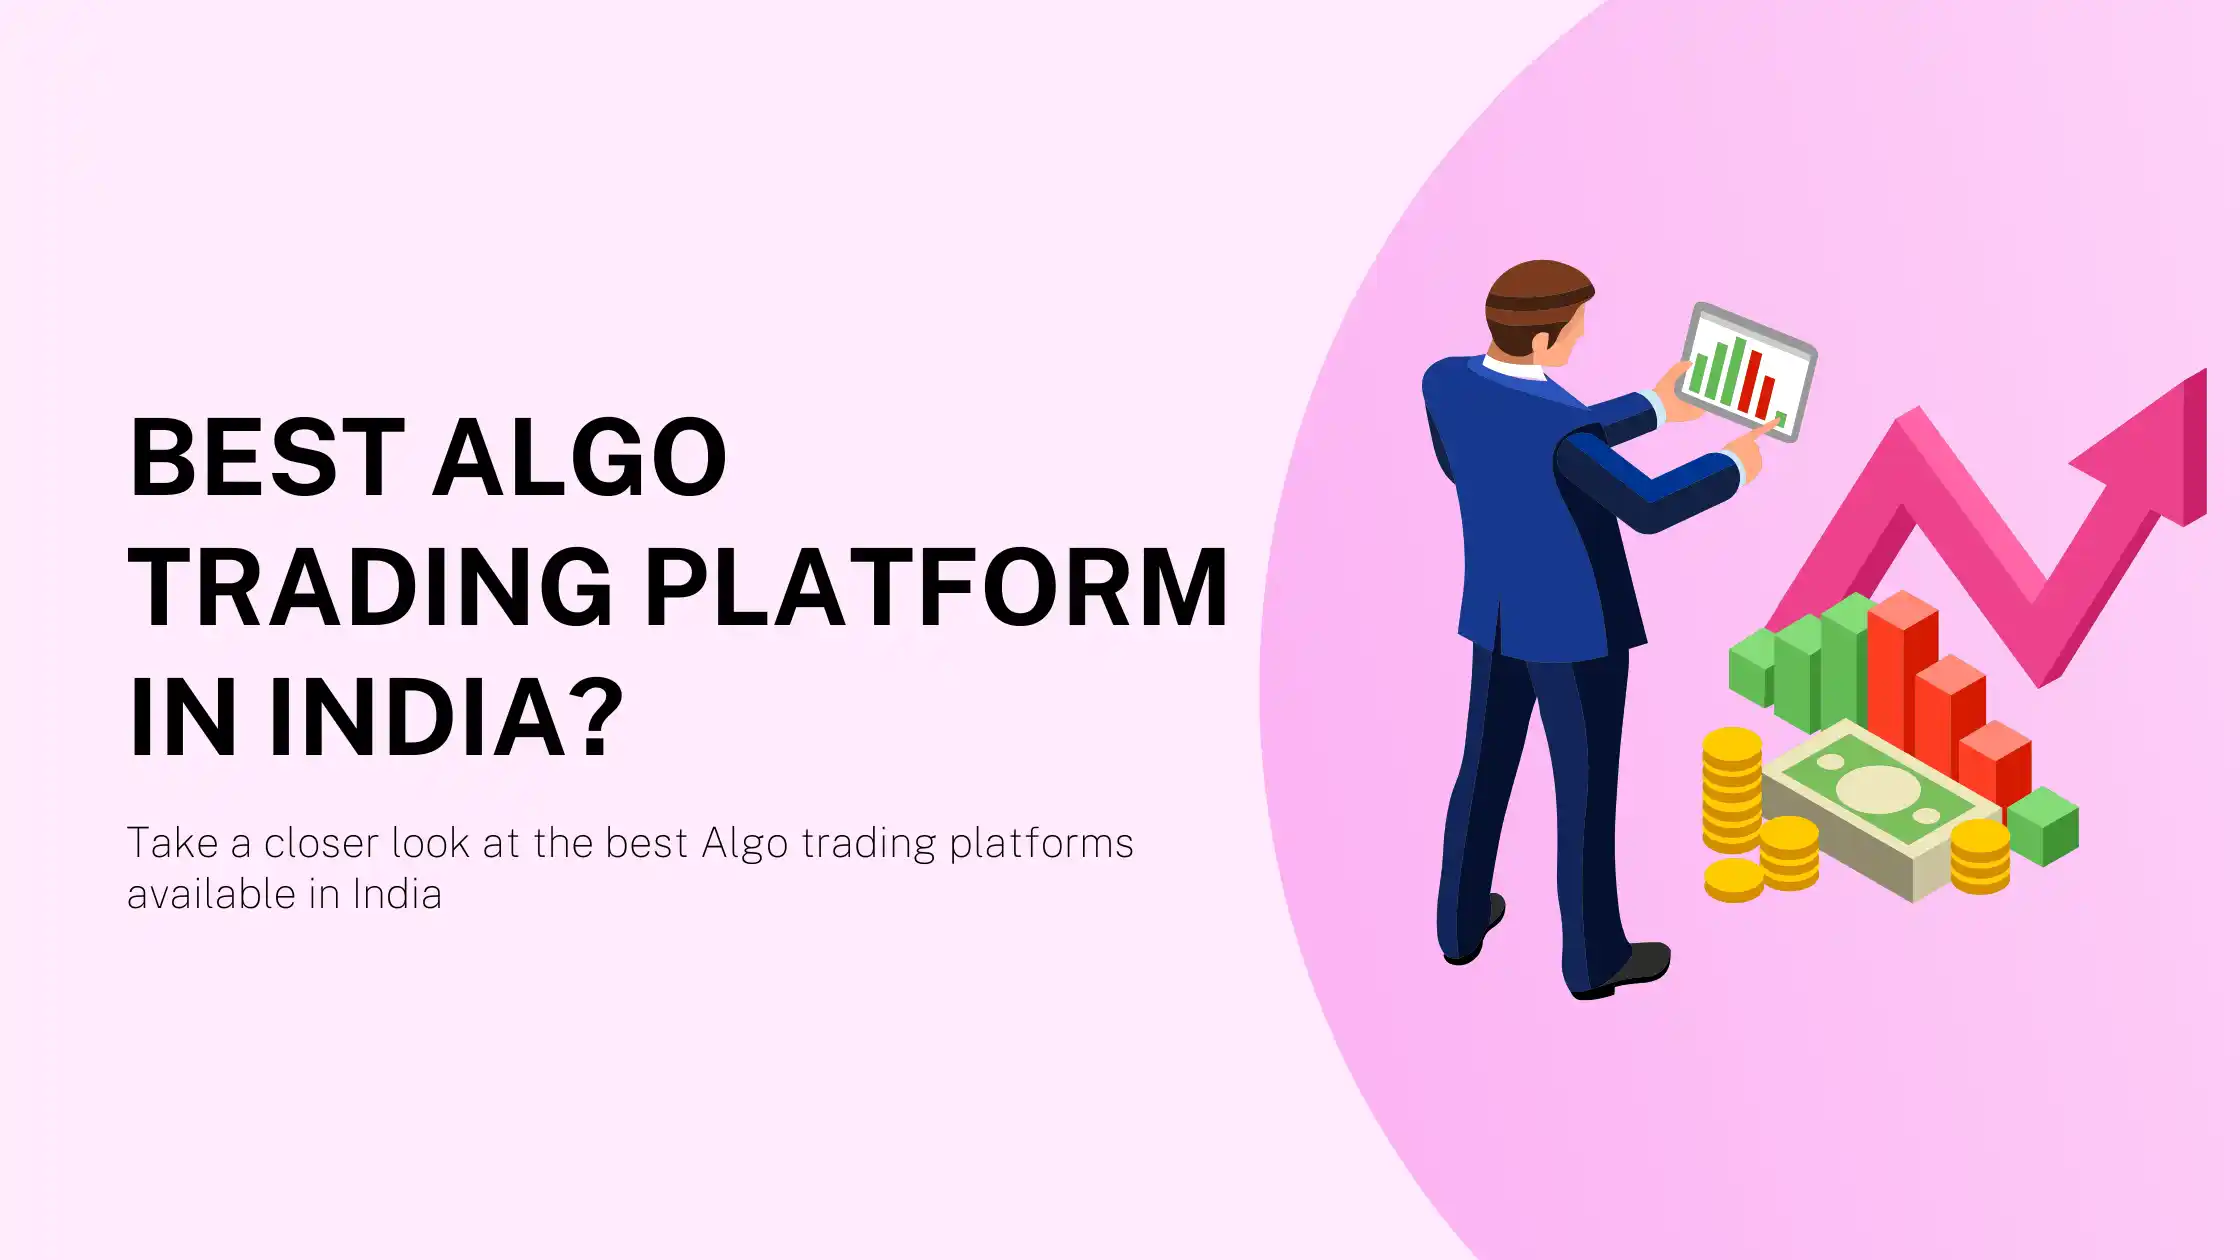 Best Algo Trading Platforms in India: Our Recommendations